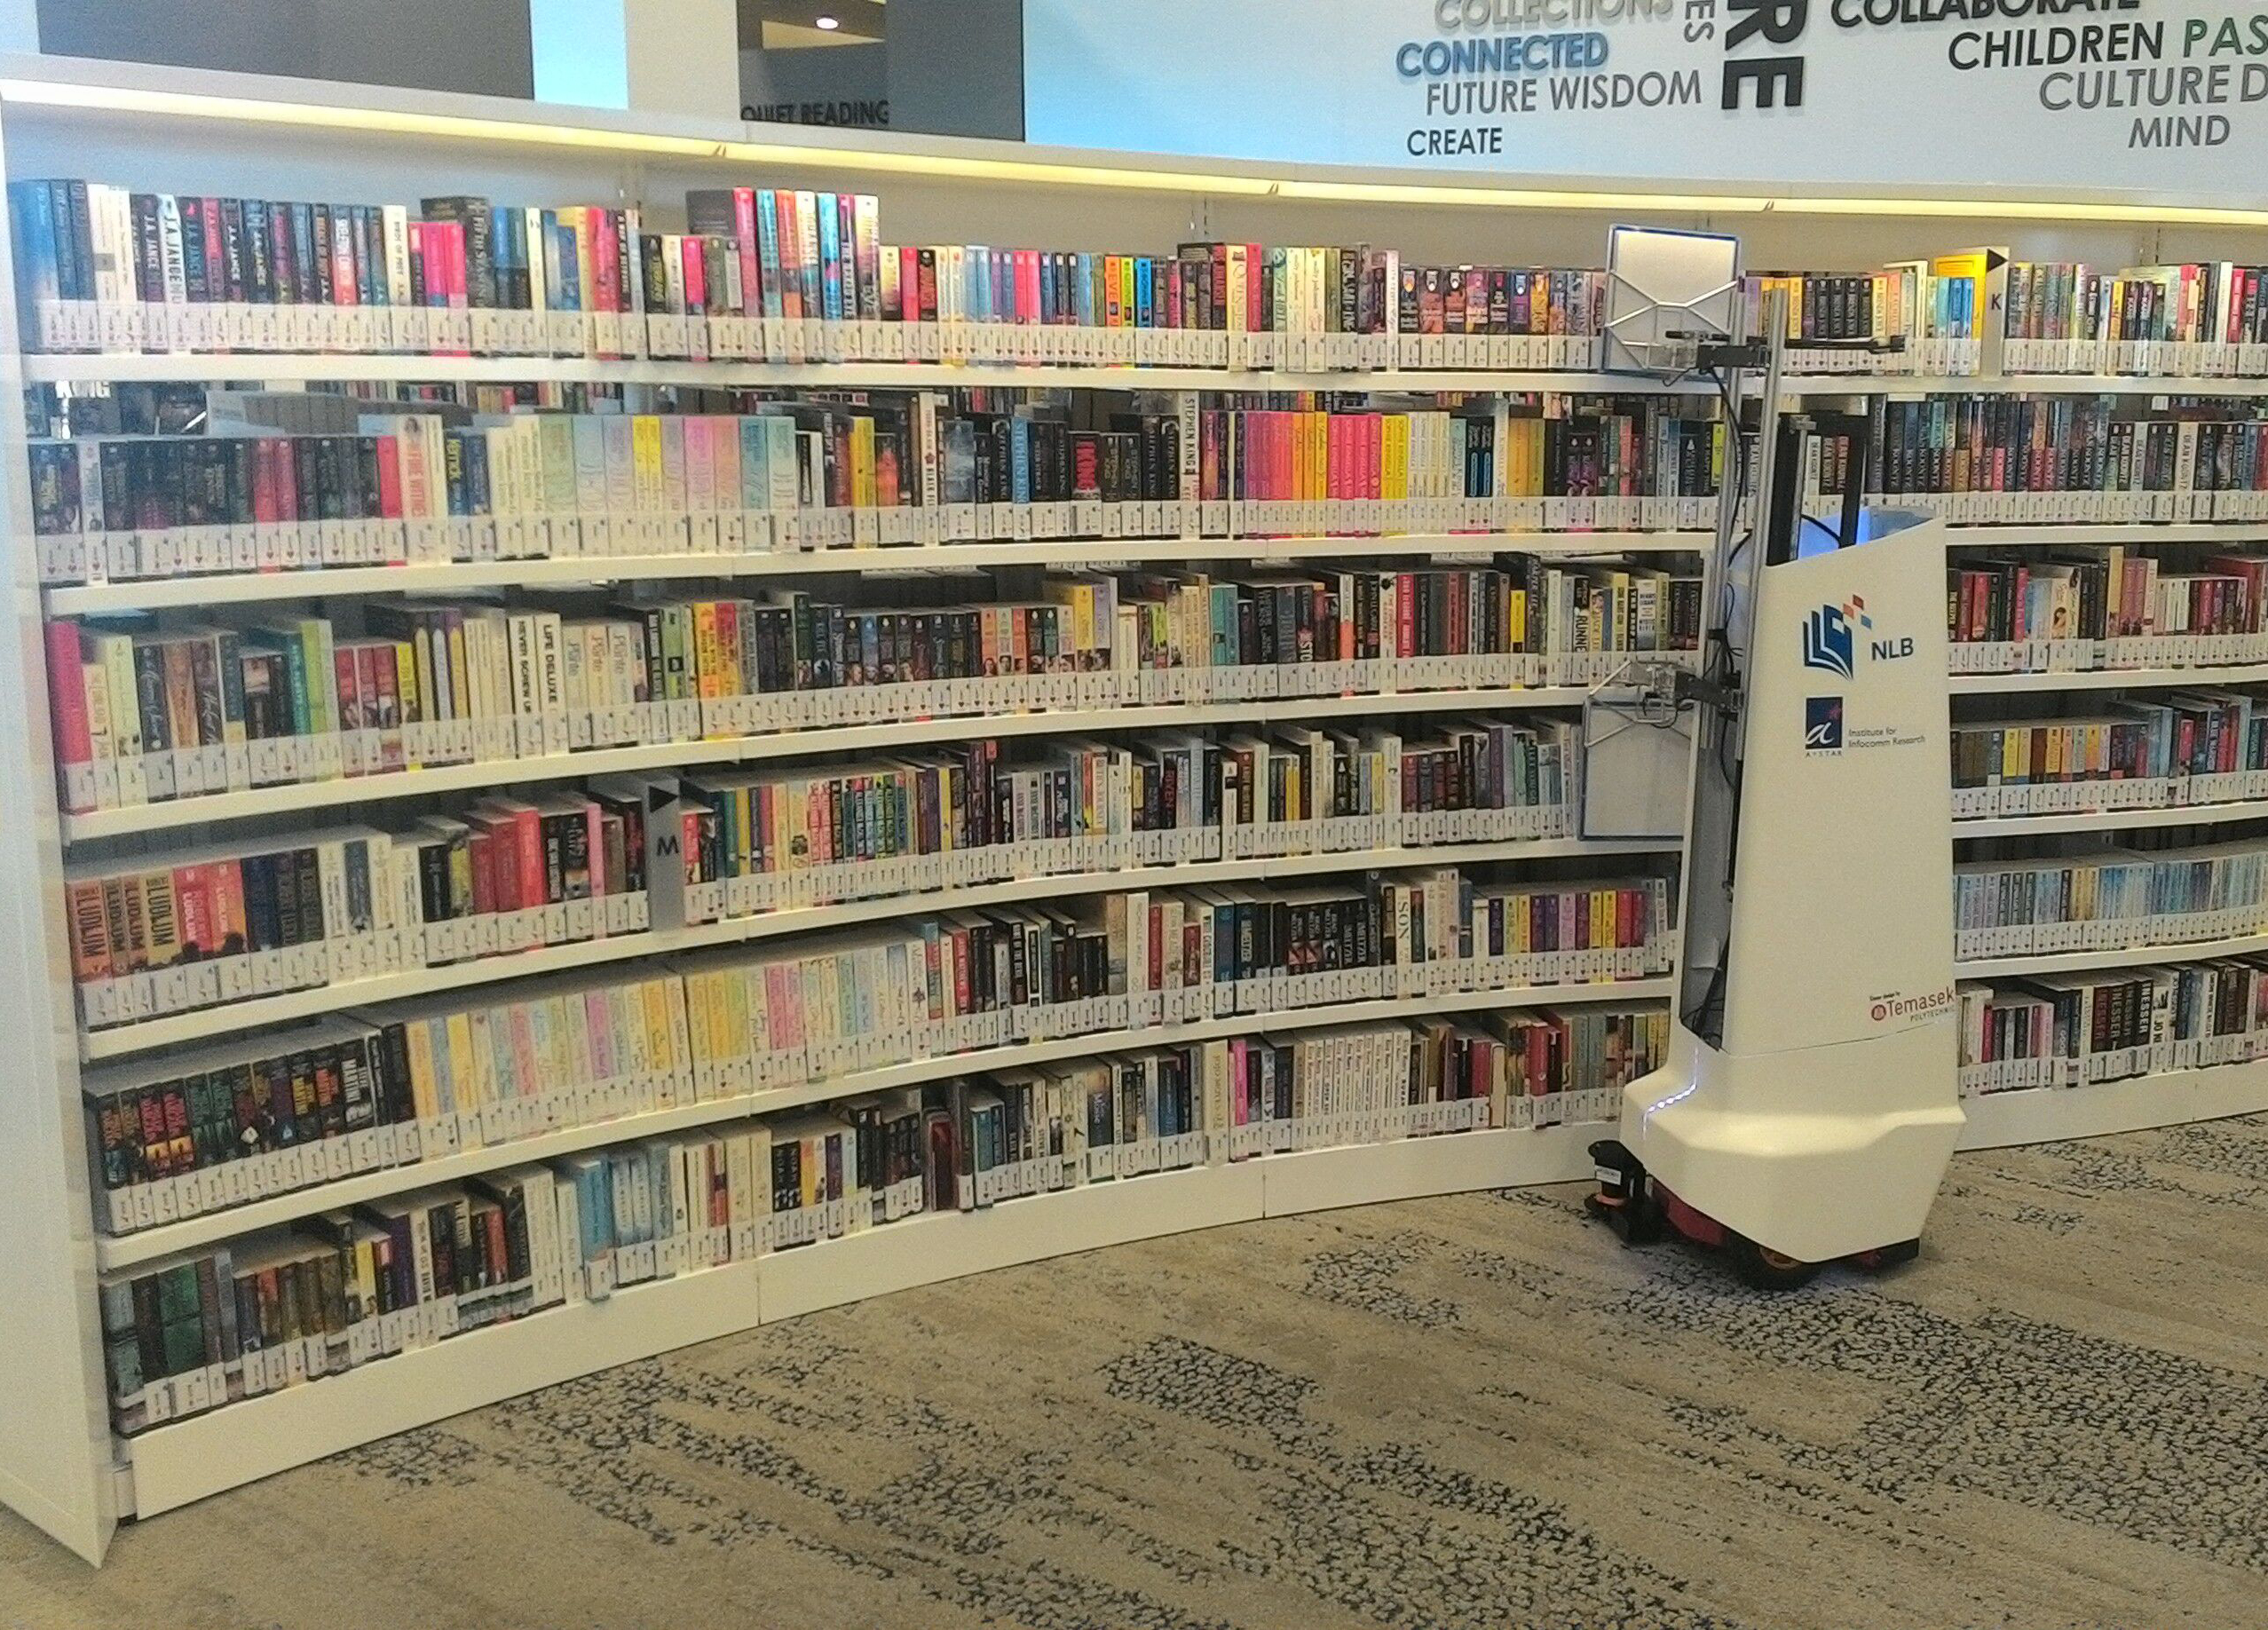 An autonomous robot developed by valuable resources is now possible thanks to robot technology developed at the Agency for Science, Technology and Research in Singapore scans a shelf of library books